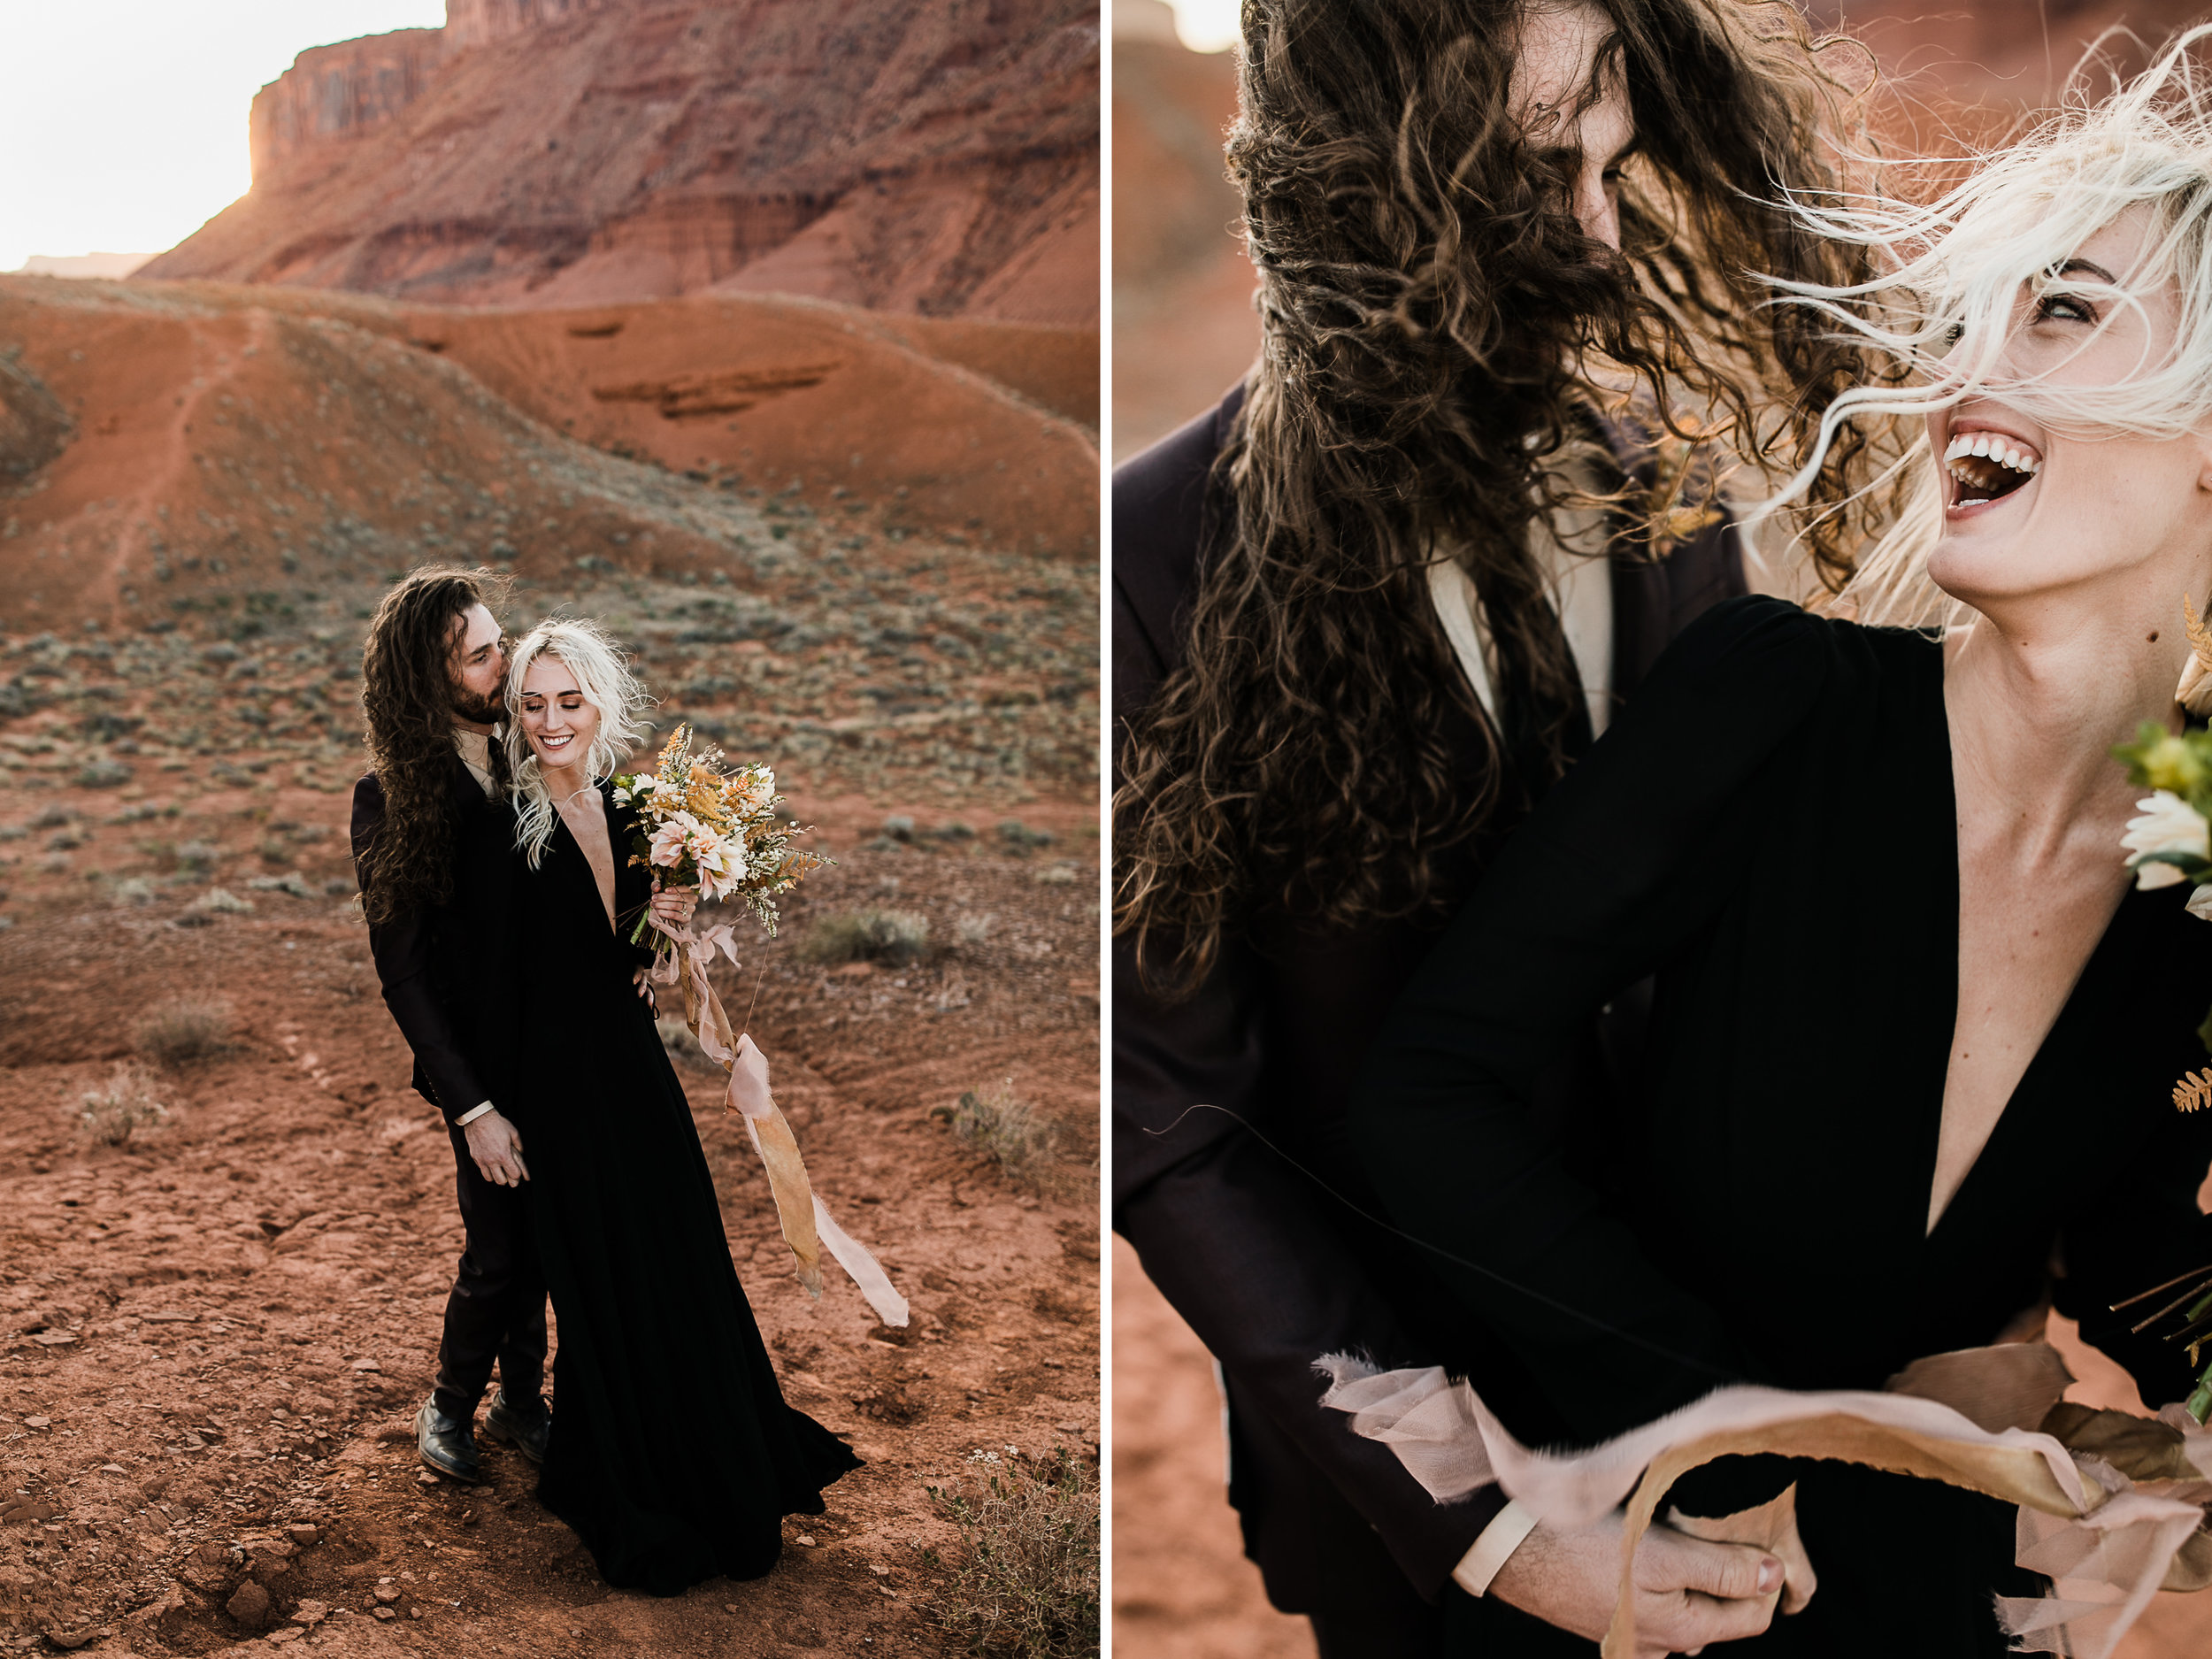 Moab desert elopement inspiration | moab, utah intimate wedding and elopement photographer | the hearnes adventure photography | www.thehearnes.com